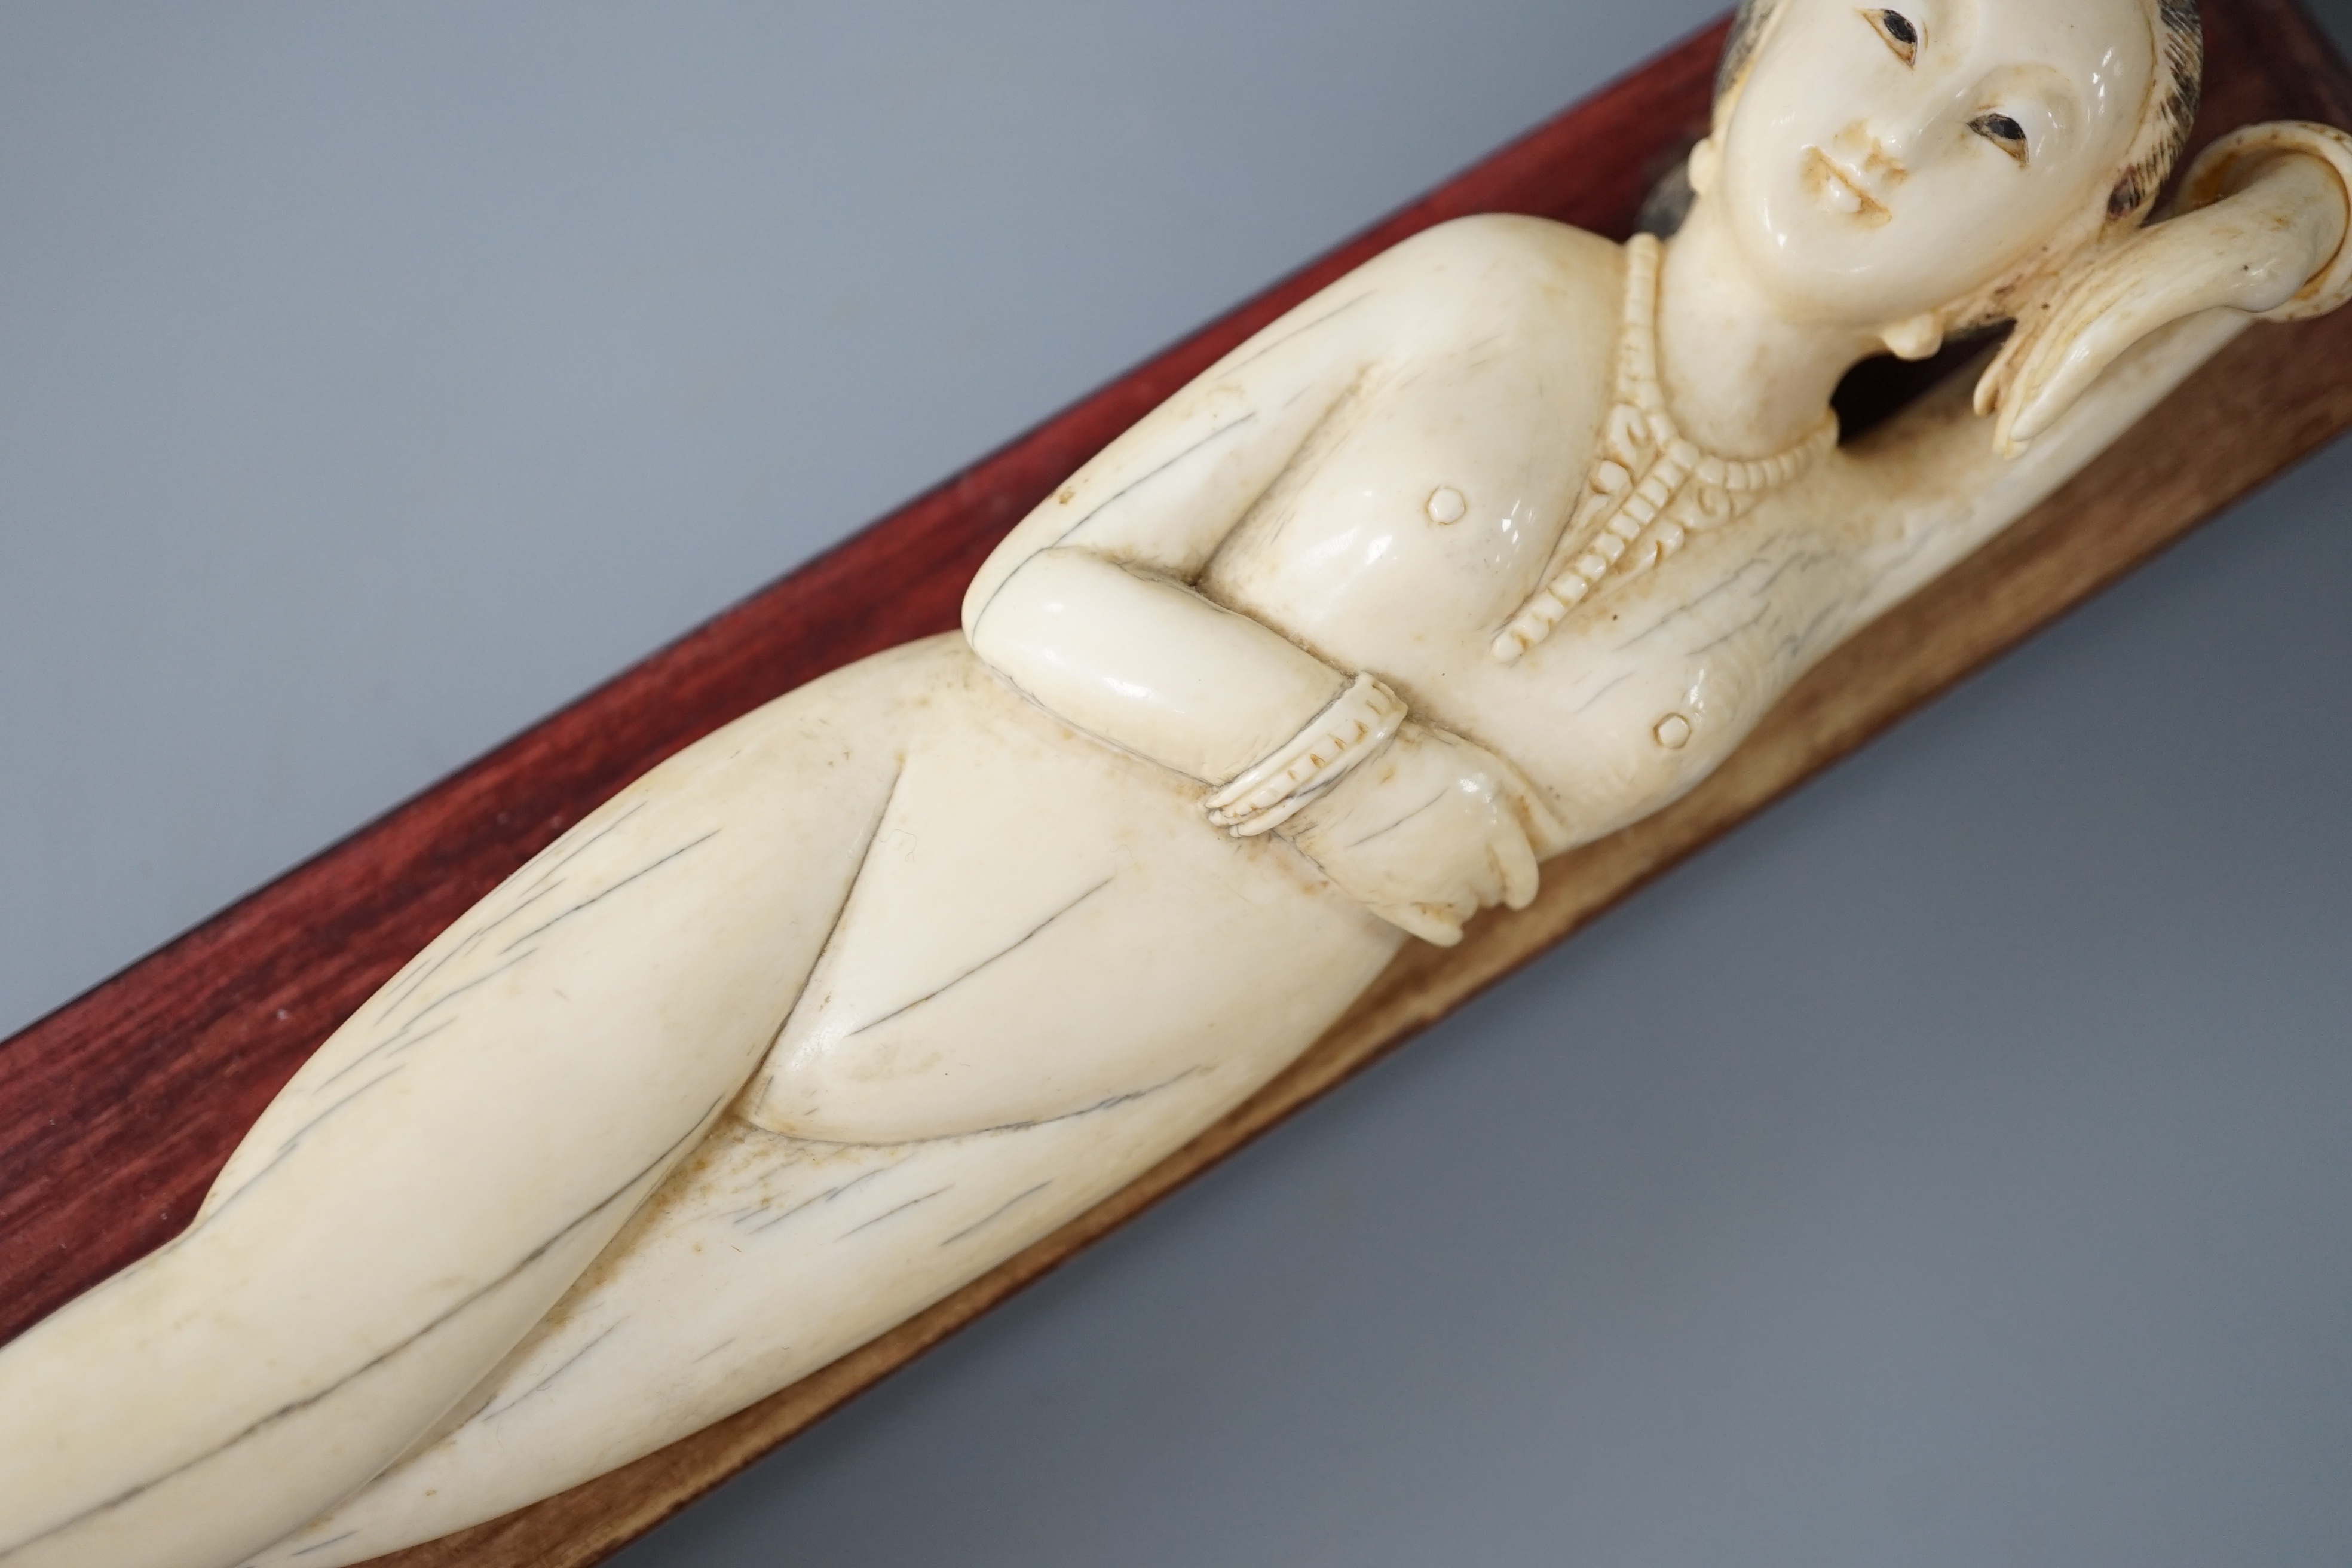 A Chinese carved ivory medicine figure, late 19th/early 20th century, wood stand. 25cm excl stand